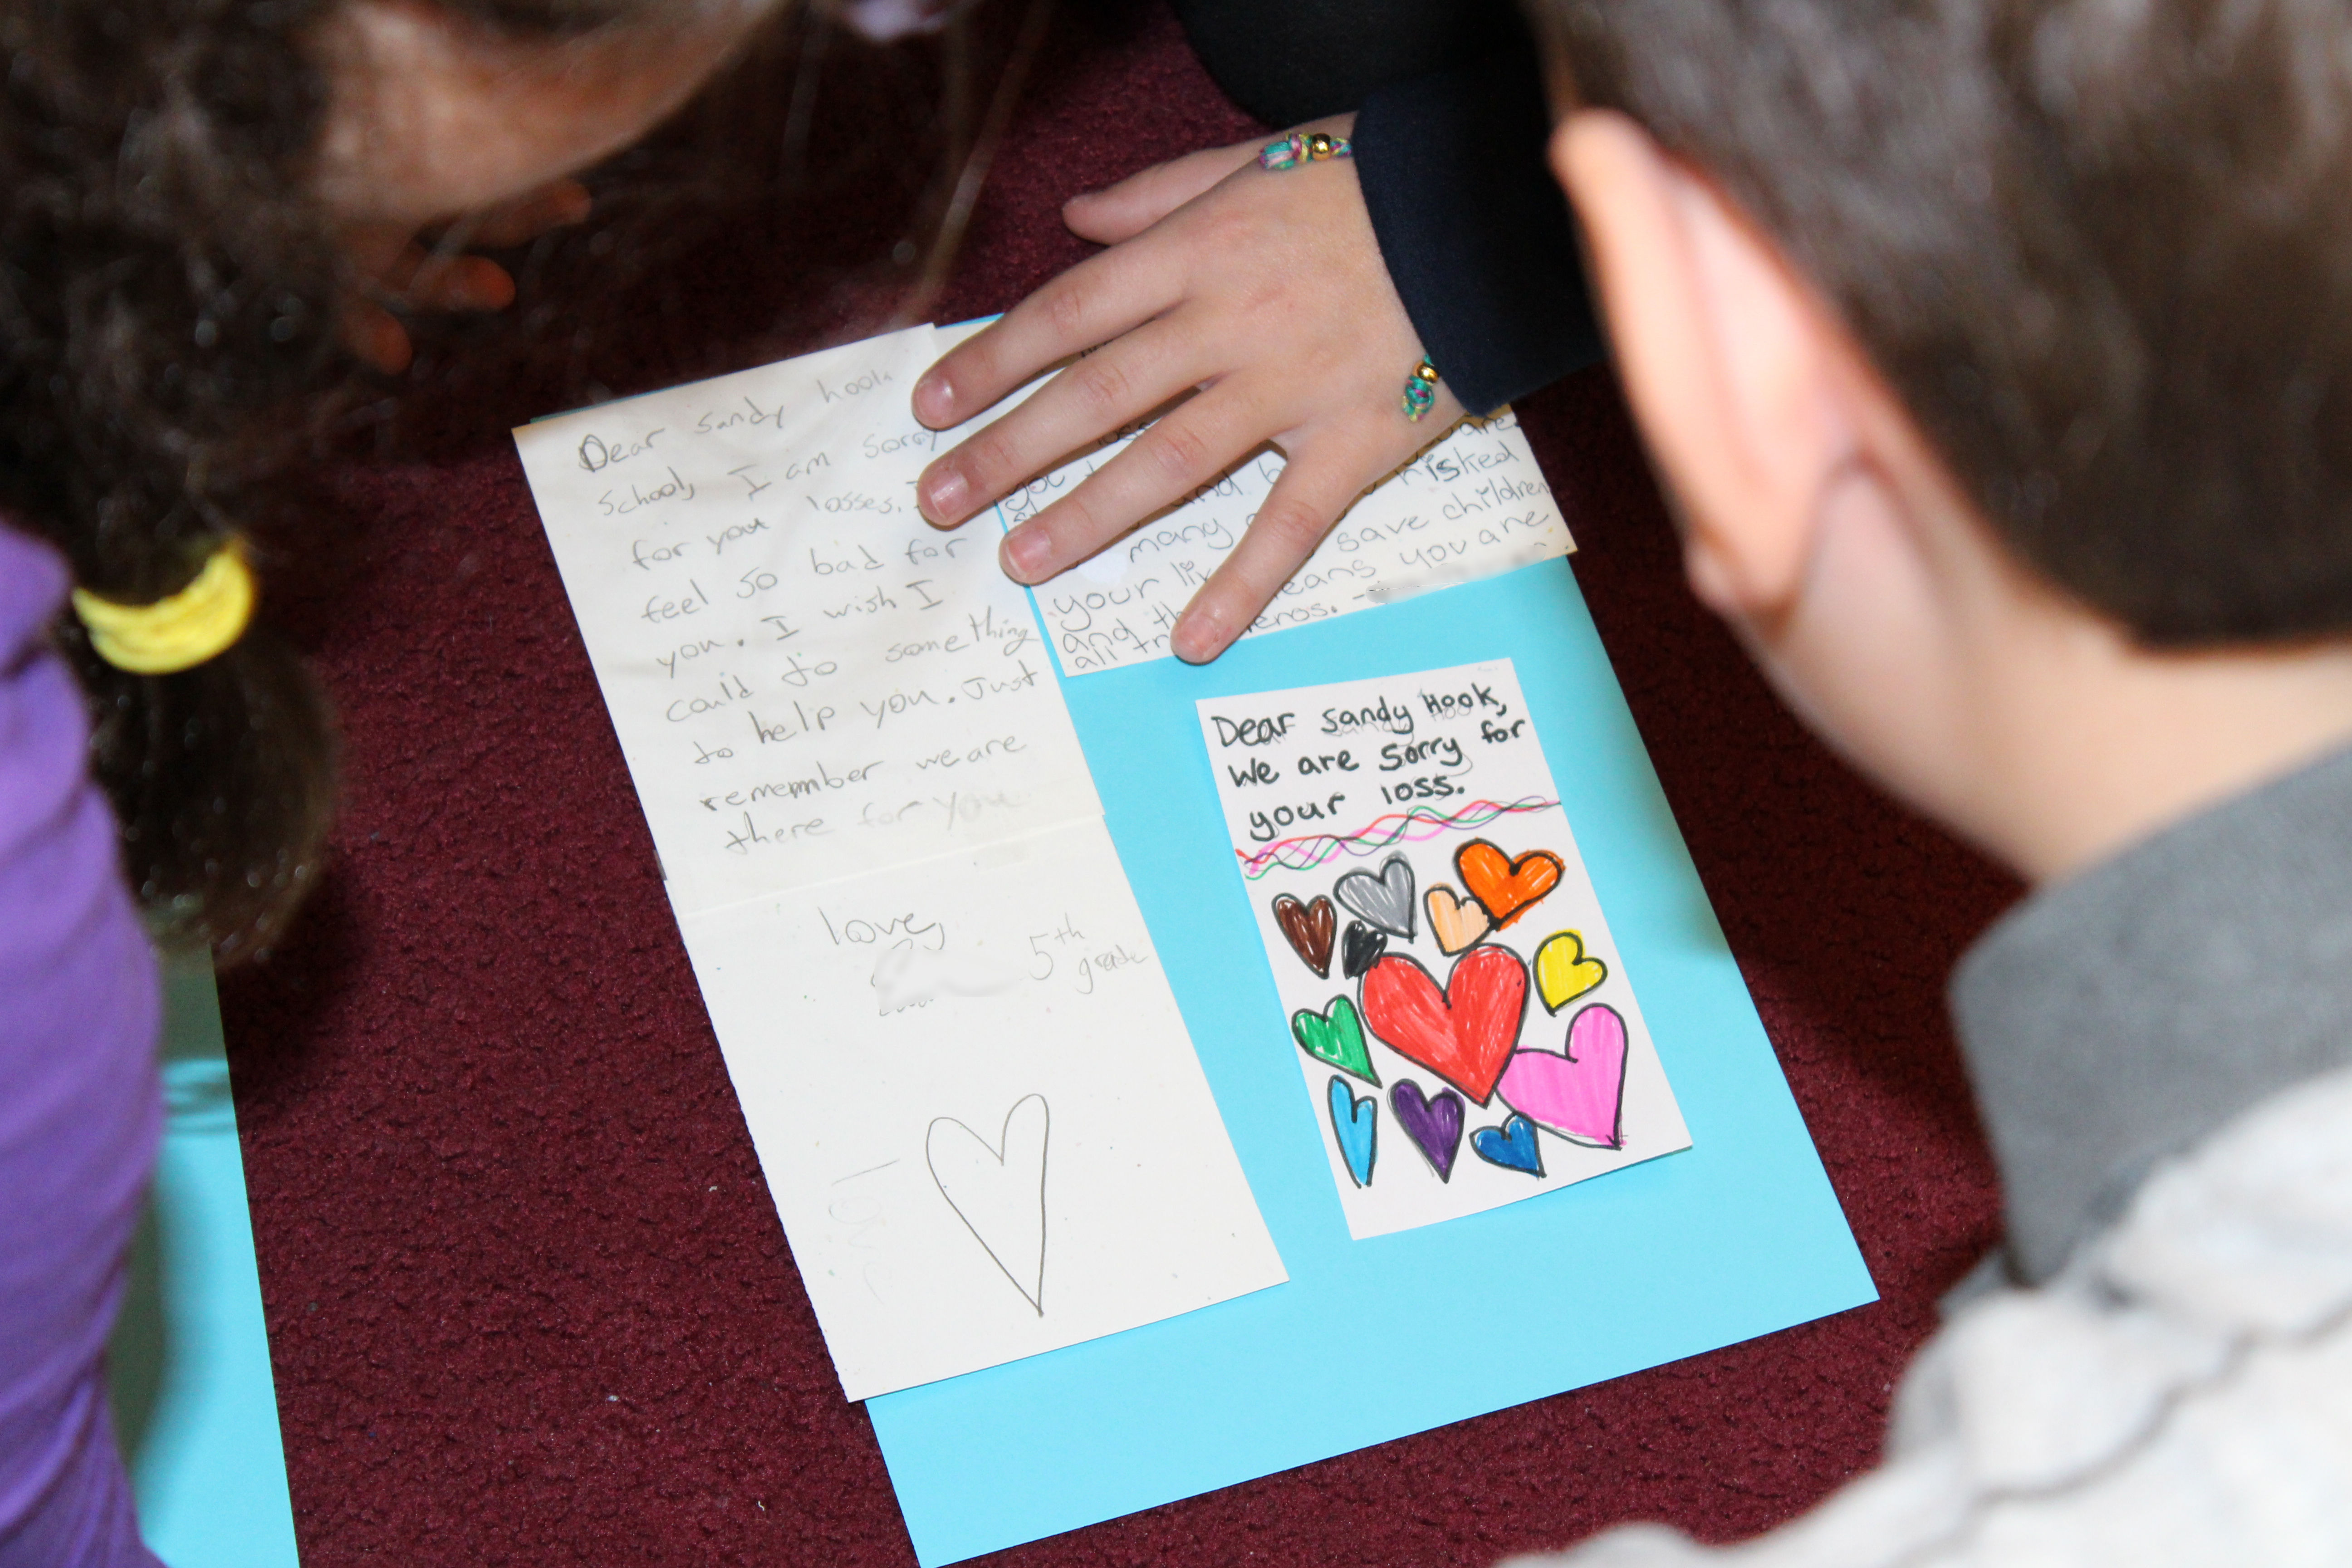 Rashi 5th Graders write letters of comfort to the victims of Sandy Hook Elementary School